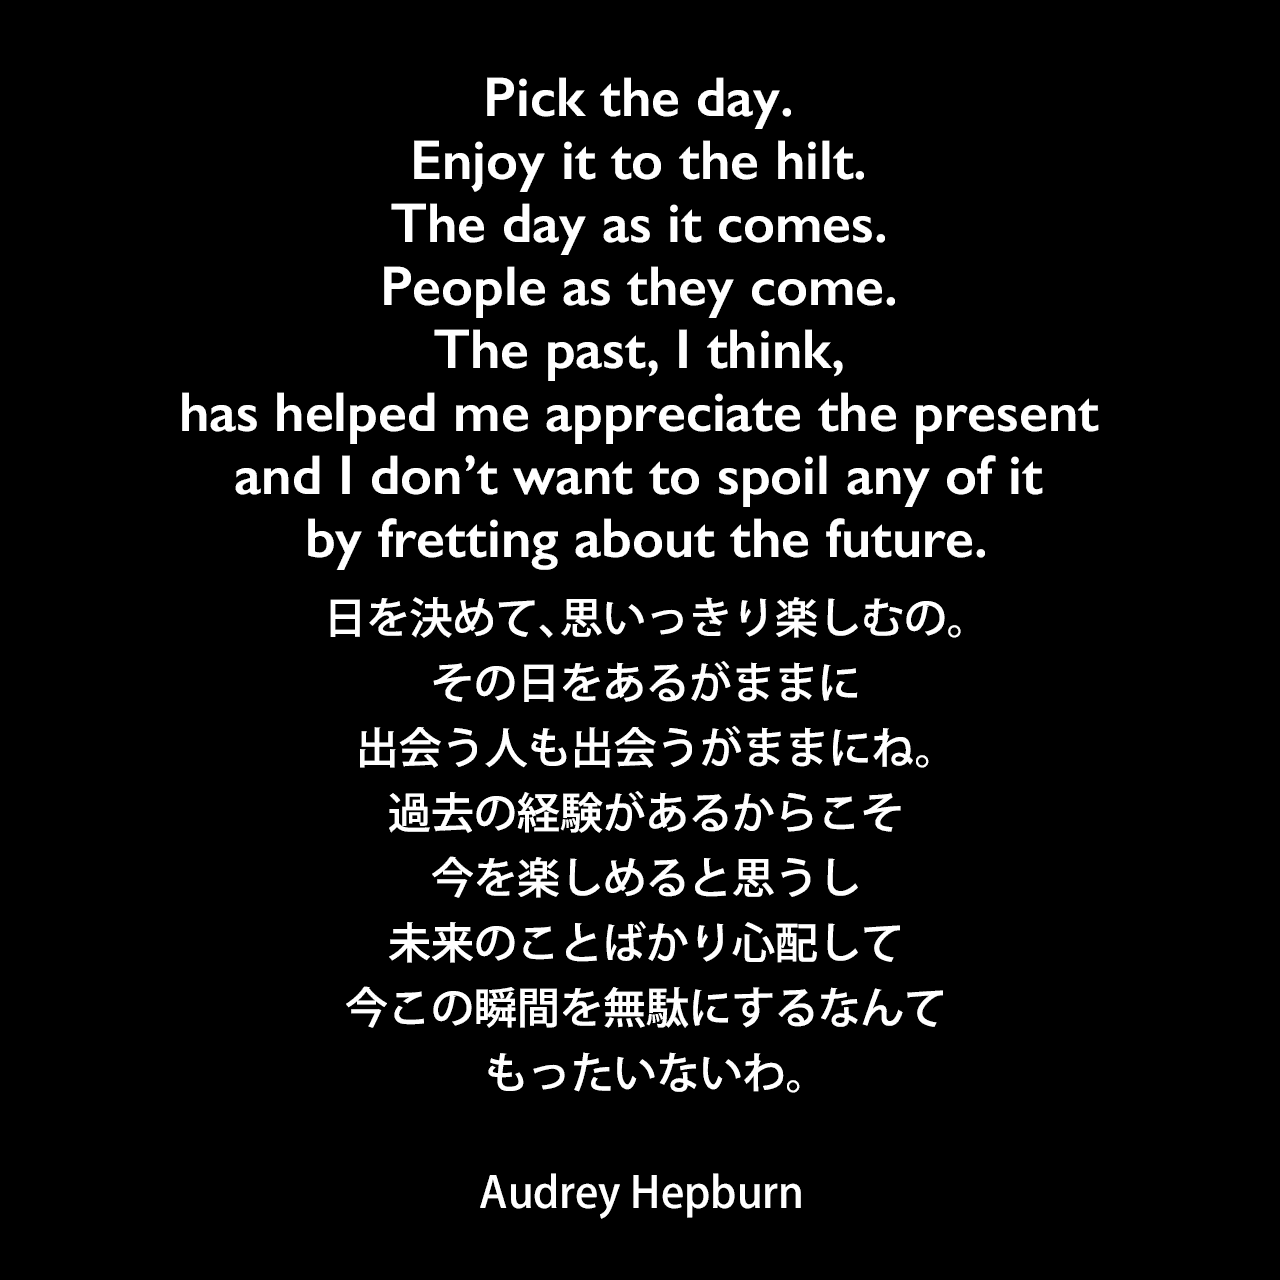 Pick the day. Enjoy it to the hilt. The day as it comes. People as they come. The past, I think, has helped me appreciate the present and I don’t want to spoil any of it by fretting about the future.日を決めて、思いっきり楽しむの。その日をあるがままに、出会う人も出会うがままにね。過去の経験があるからこそ今を楽しめると思うし、未来のことばかり心配して、今この瞬間を無駄にするなんてもったいないわ。Audrey Hepburn